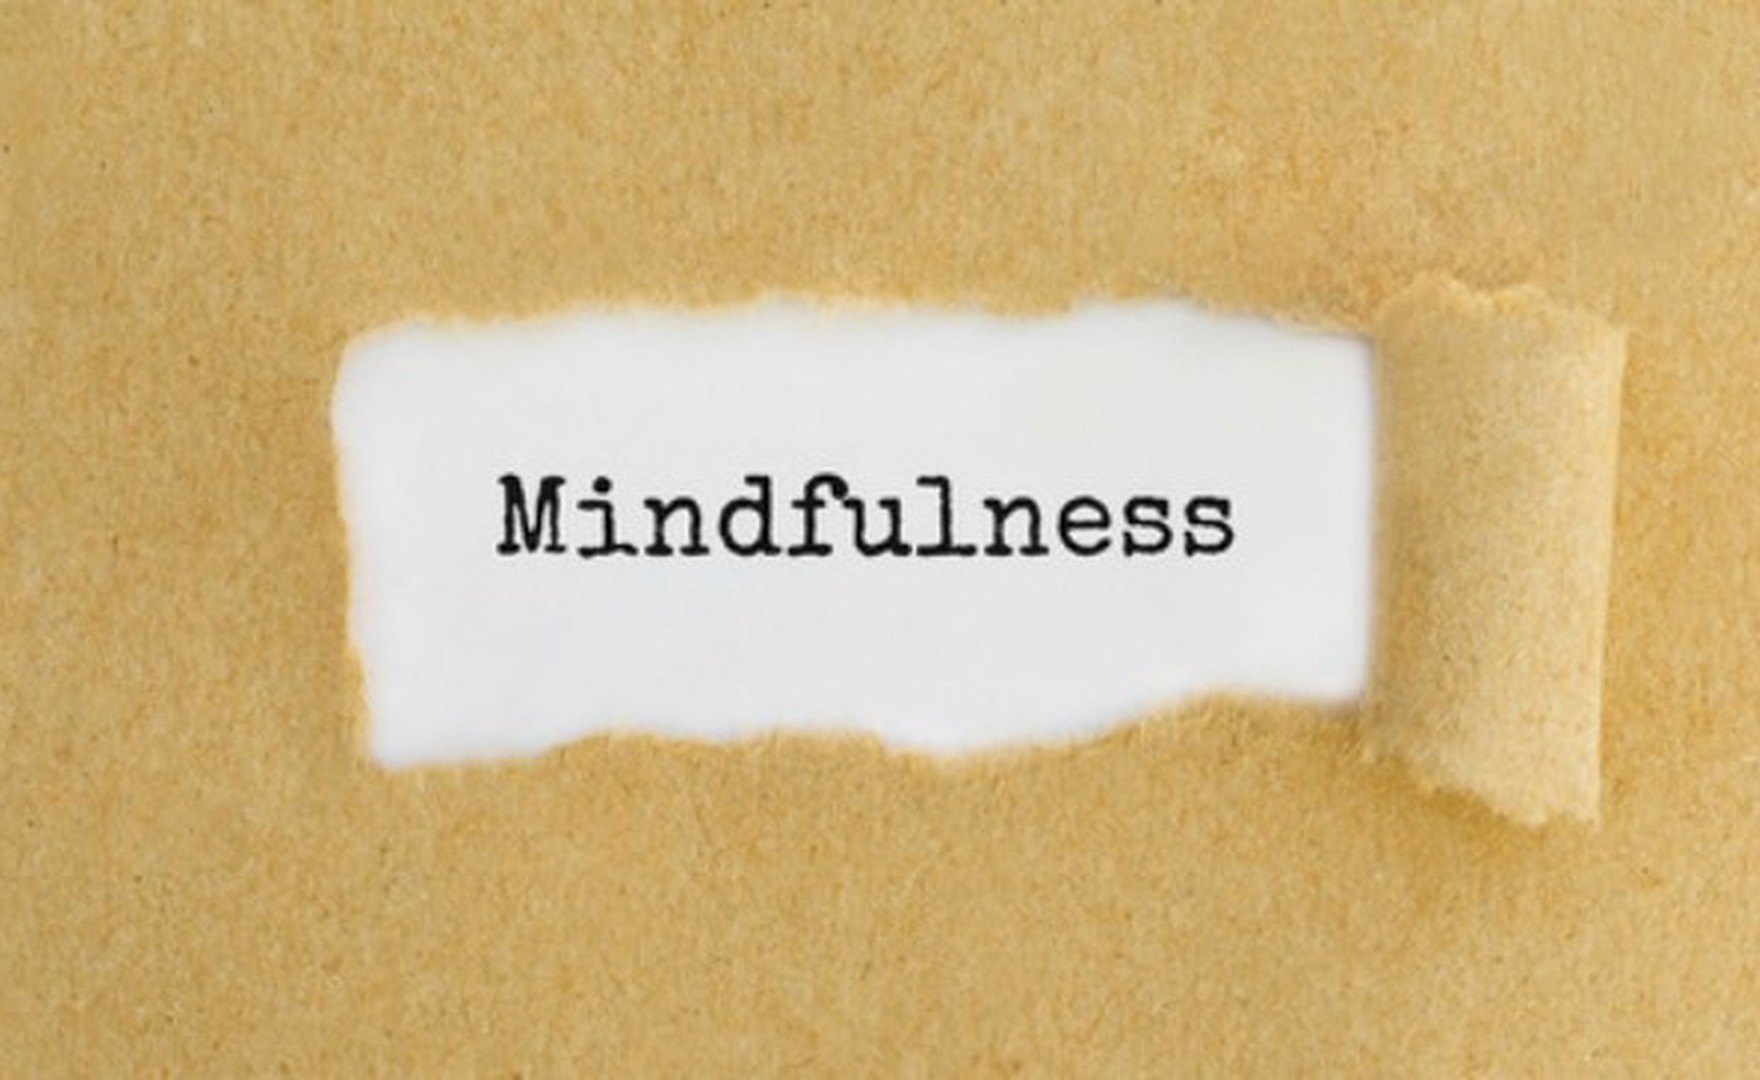 Mindfulness as a Frontline Intervention for Mental Health